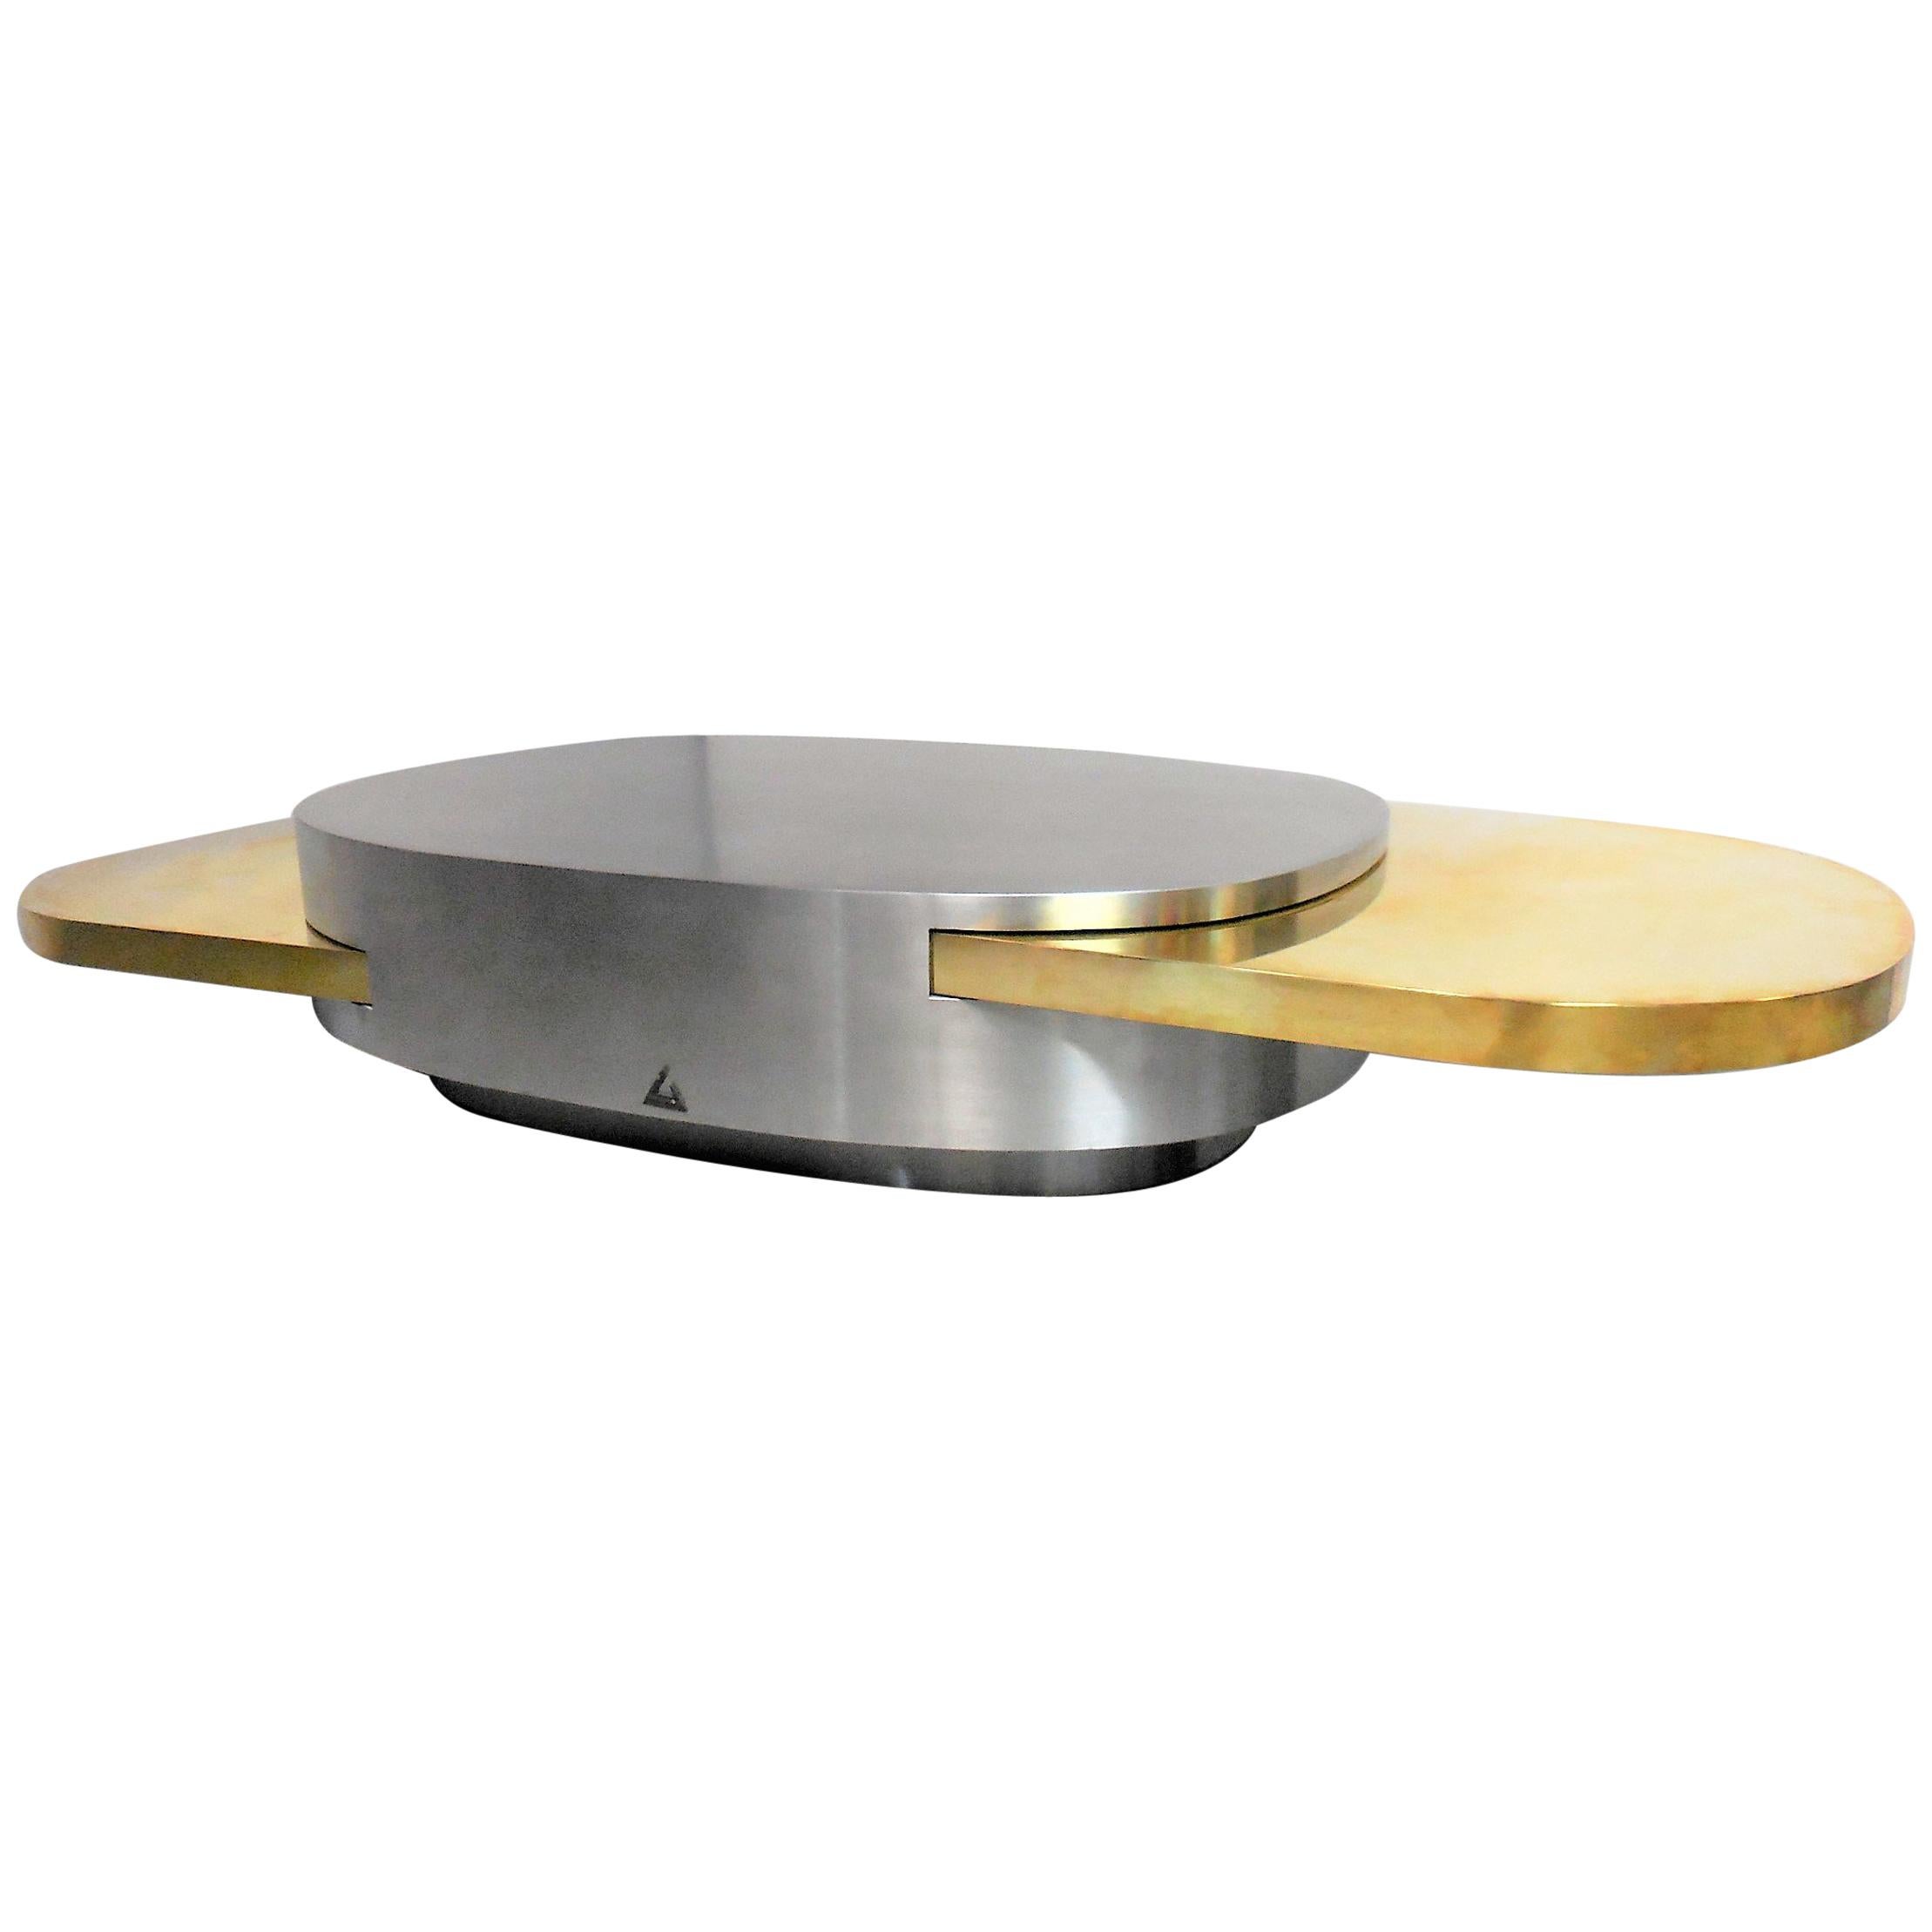 Gabriella Crespi Stainless and Brass Ellisse Coffee Table, 1976